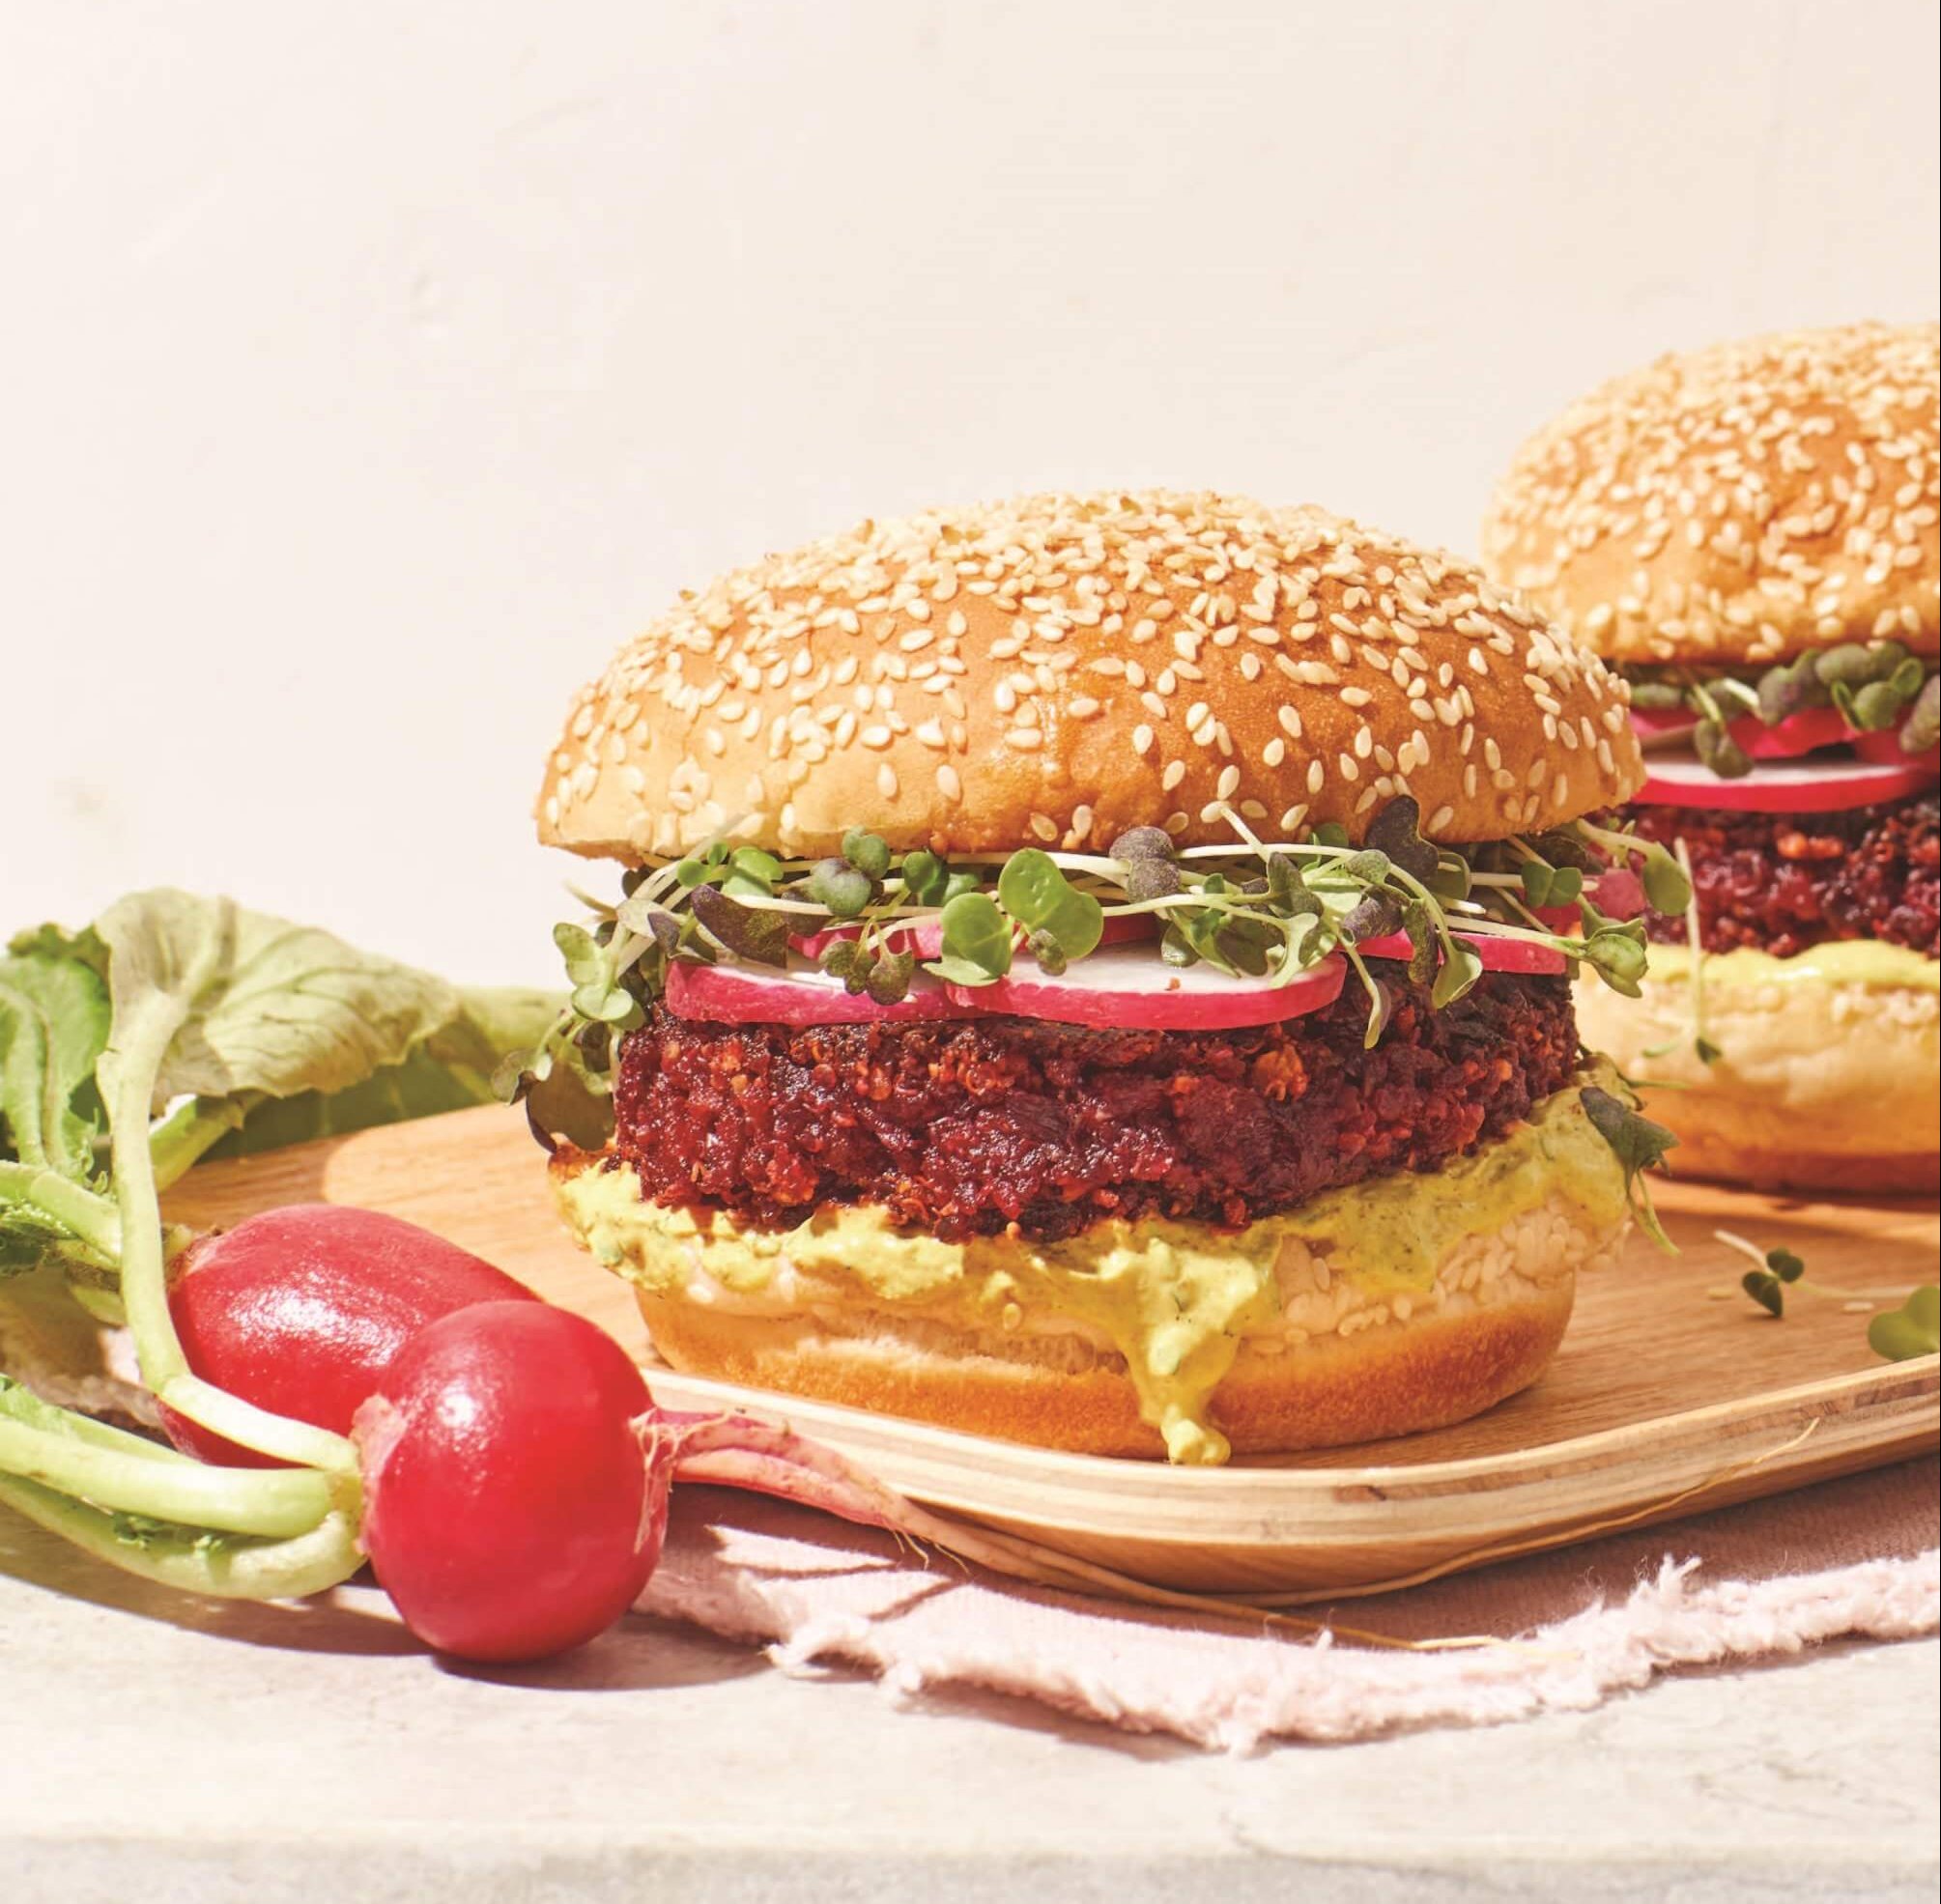 Two veggies burgers with a bunch of beets next to them against a pale pink background